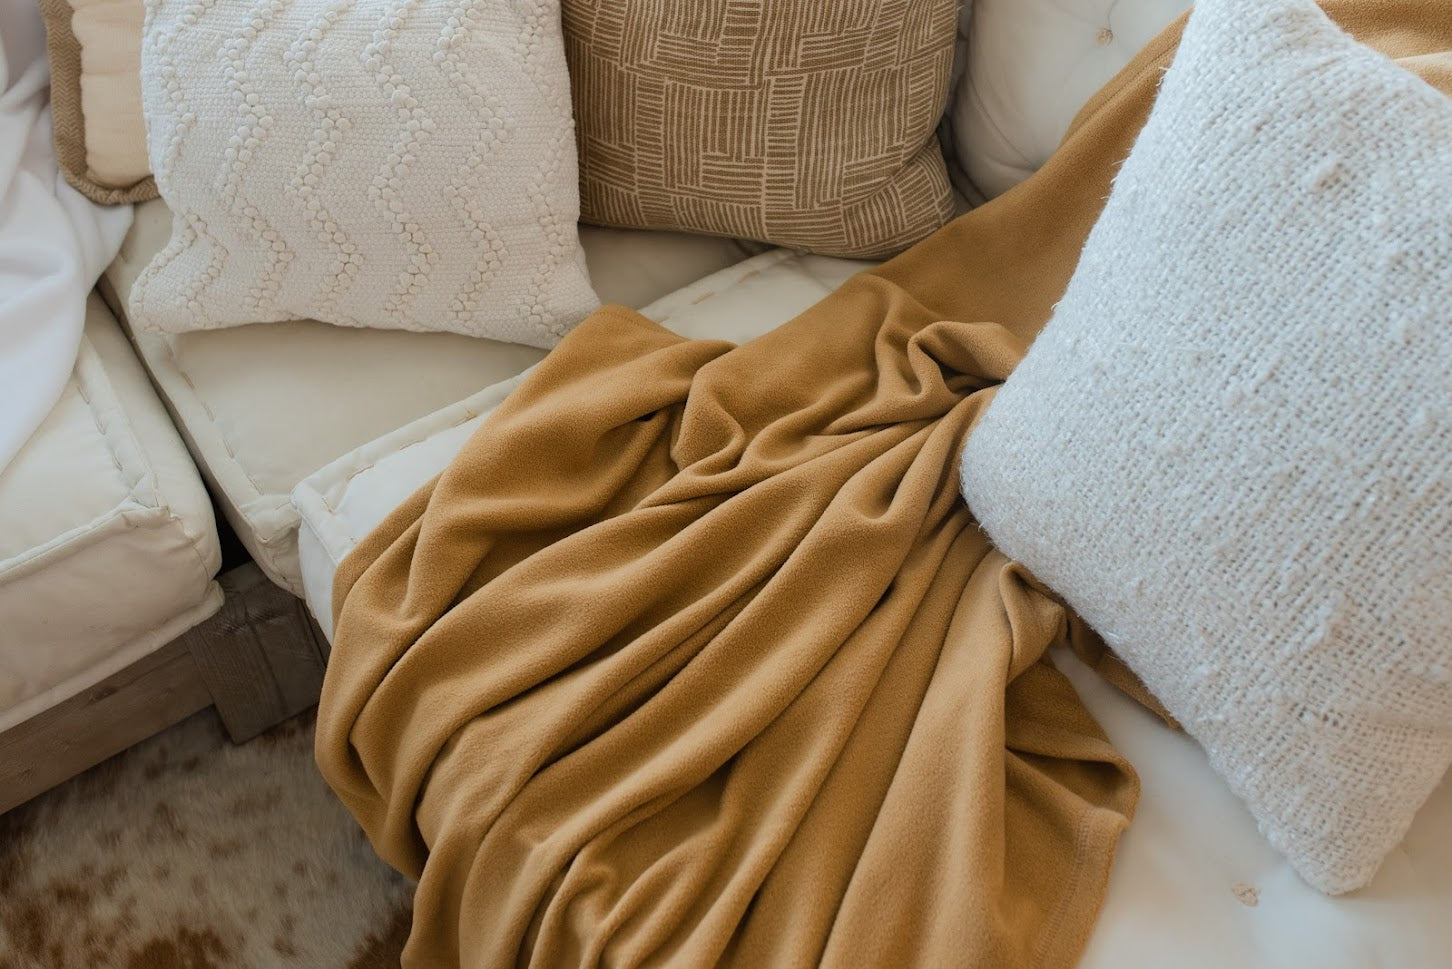 Blankets & Throws, Bedding That Will Last a Lifetime